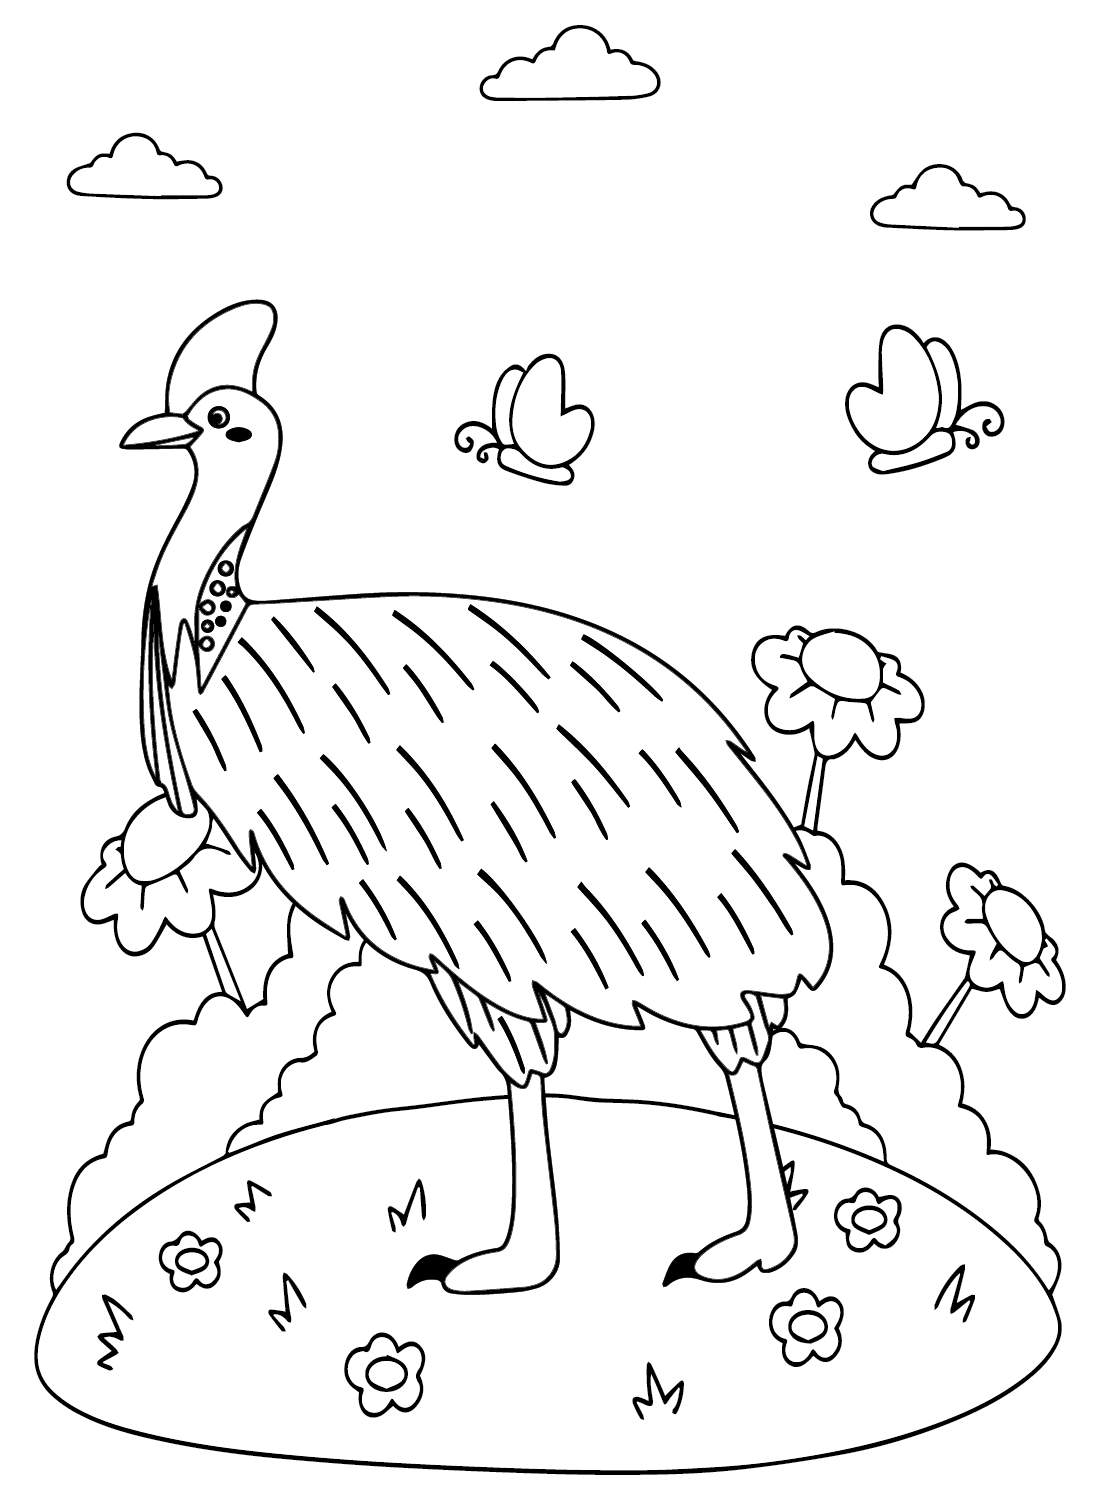 Cassowary Coloring Page from Cassowary